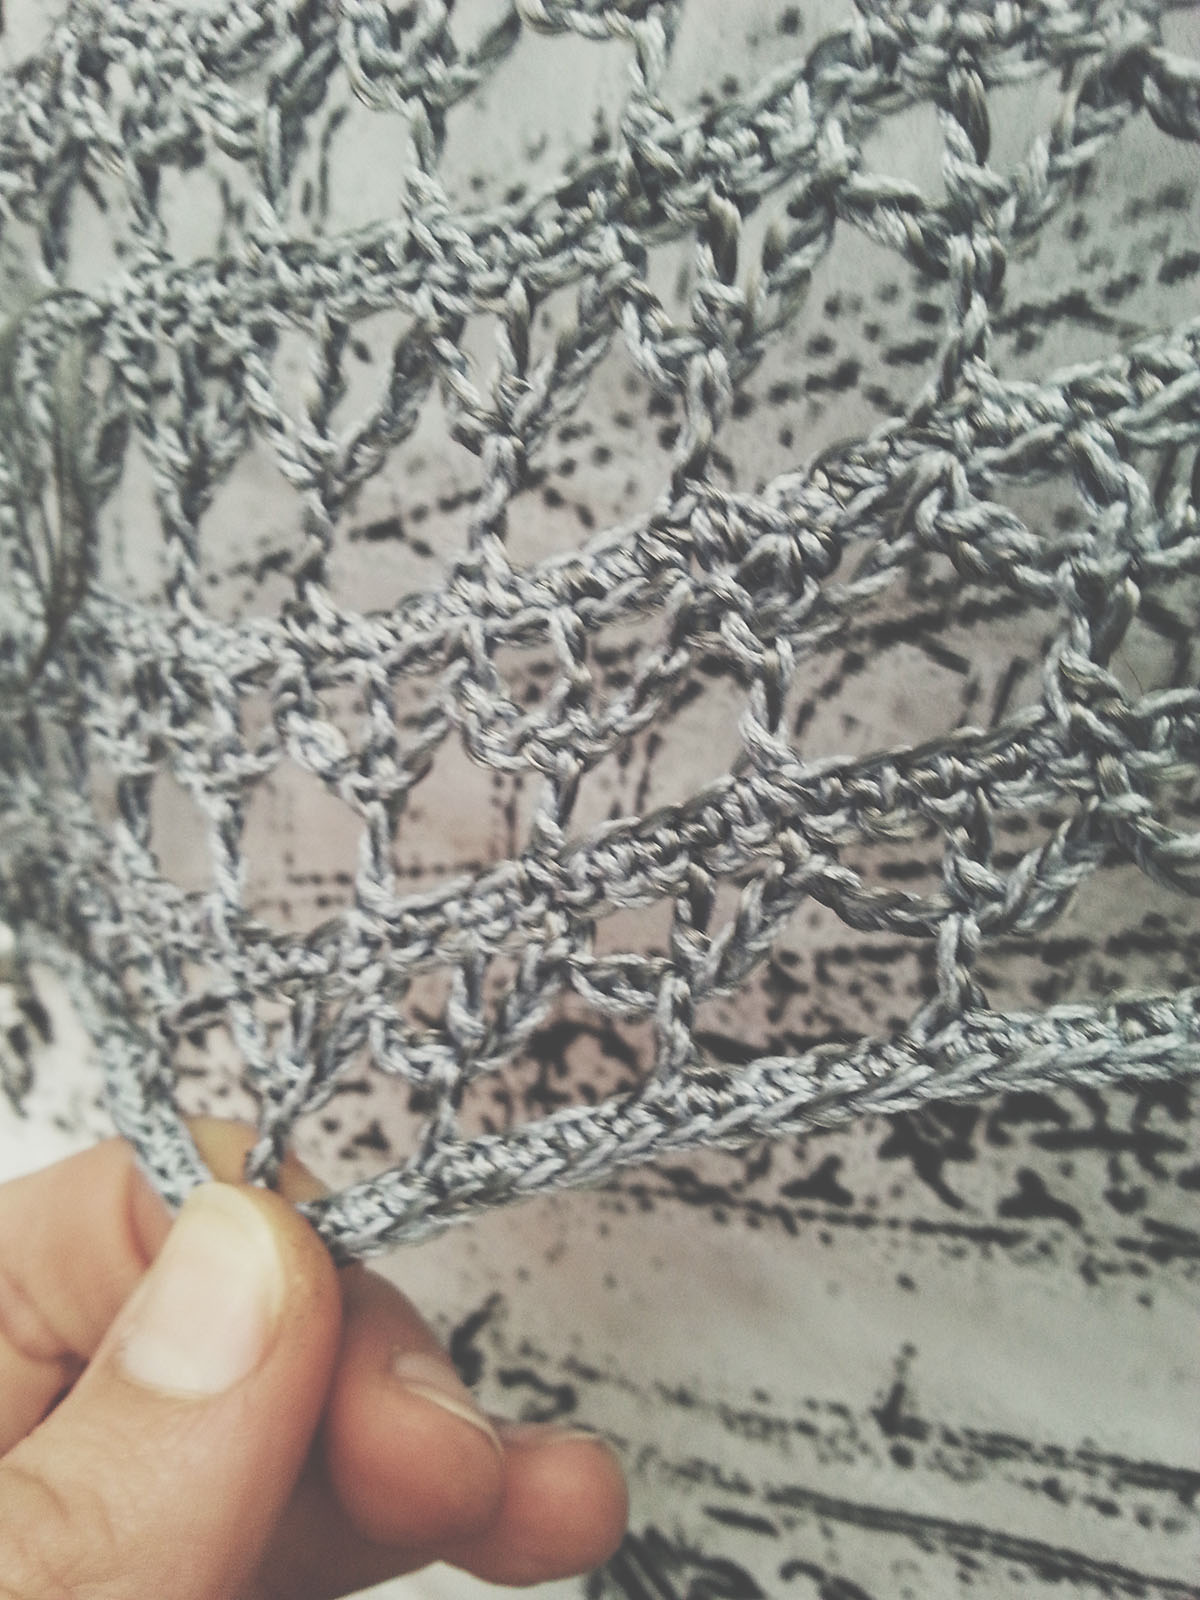 metalic lace crocheted to look like architectural details on a mosque